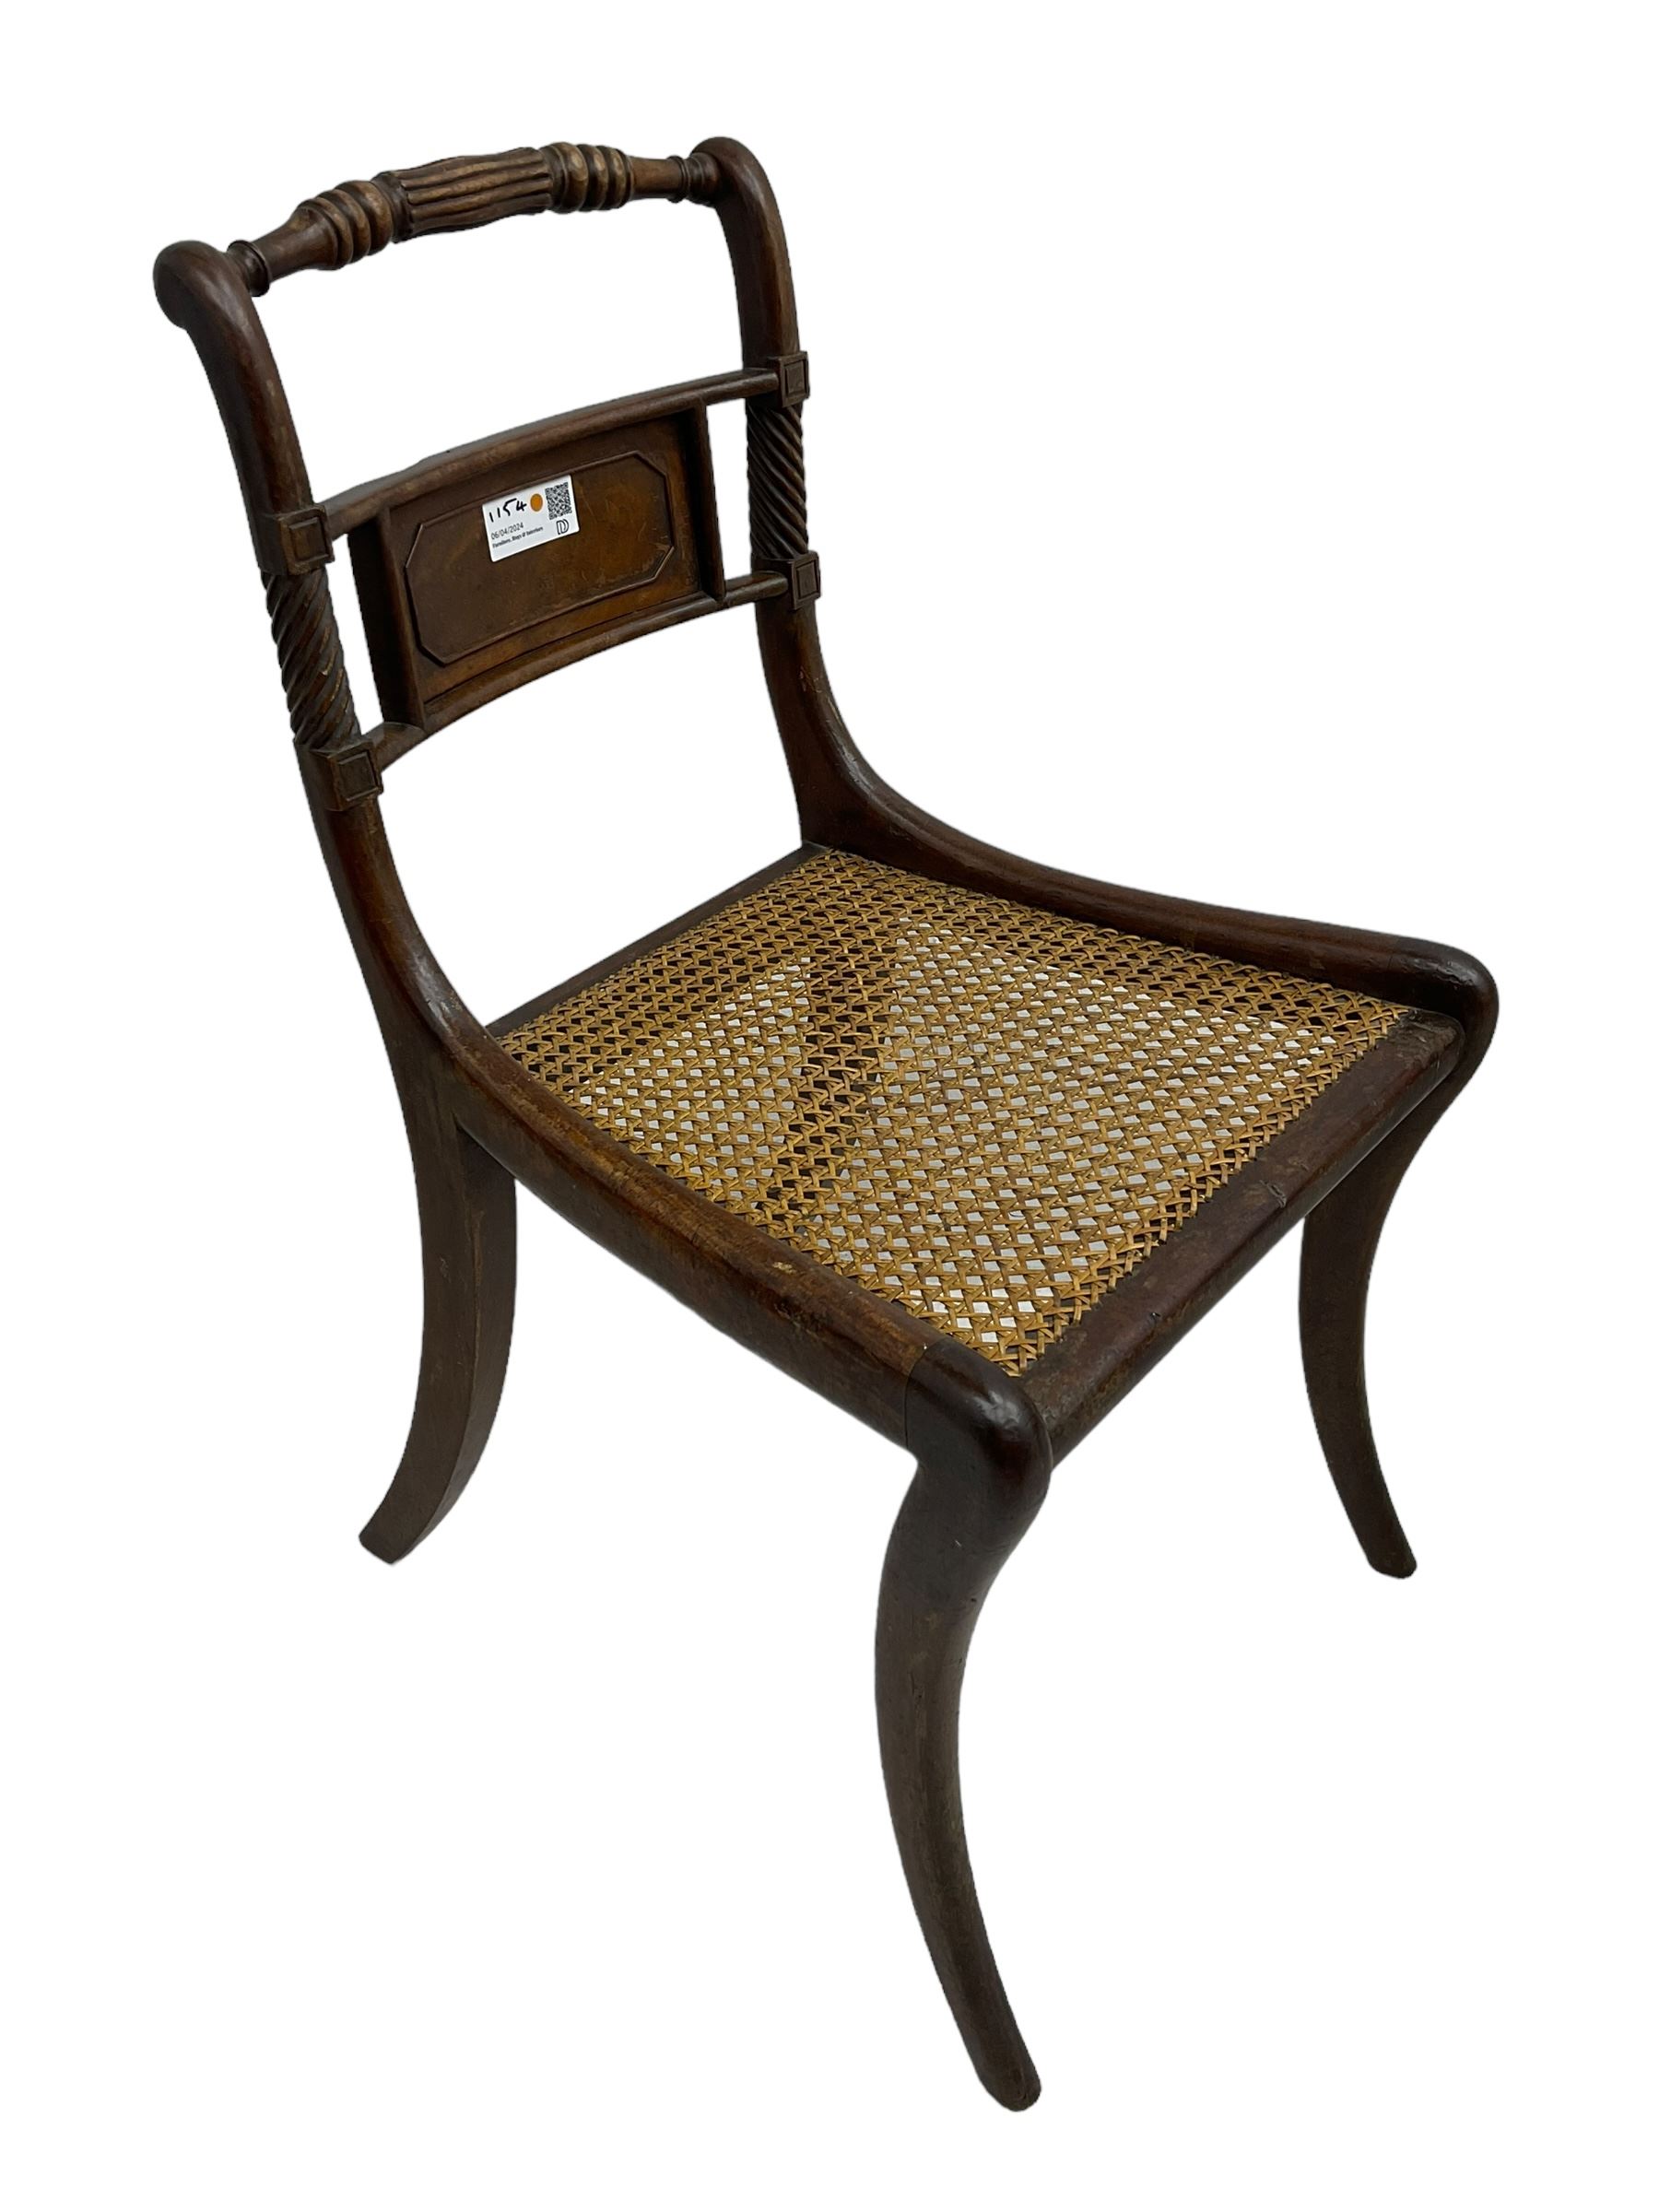 Collection of early 19th century Regency period dining chairs - set of three early 19th century maho - Image 7 of 8